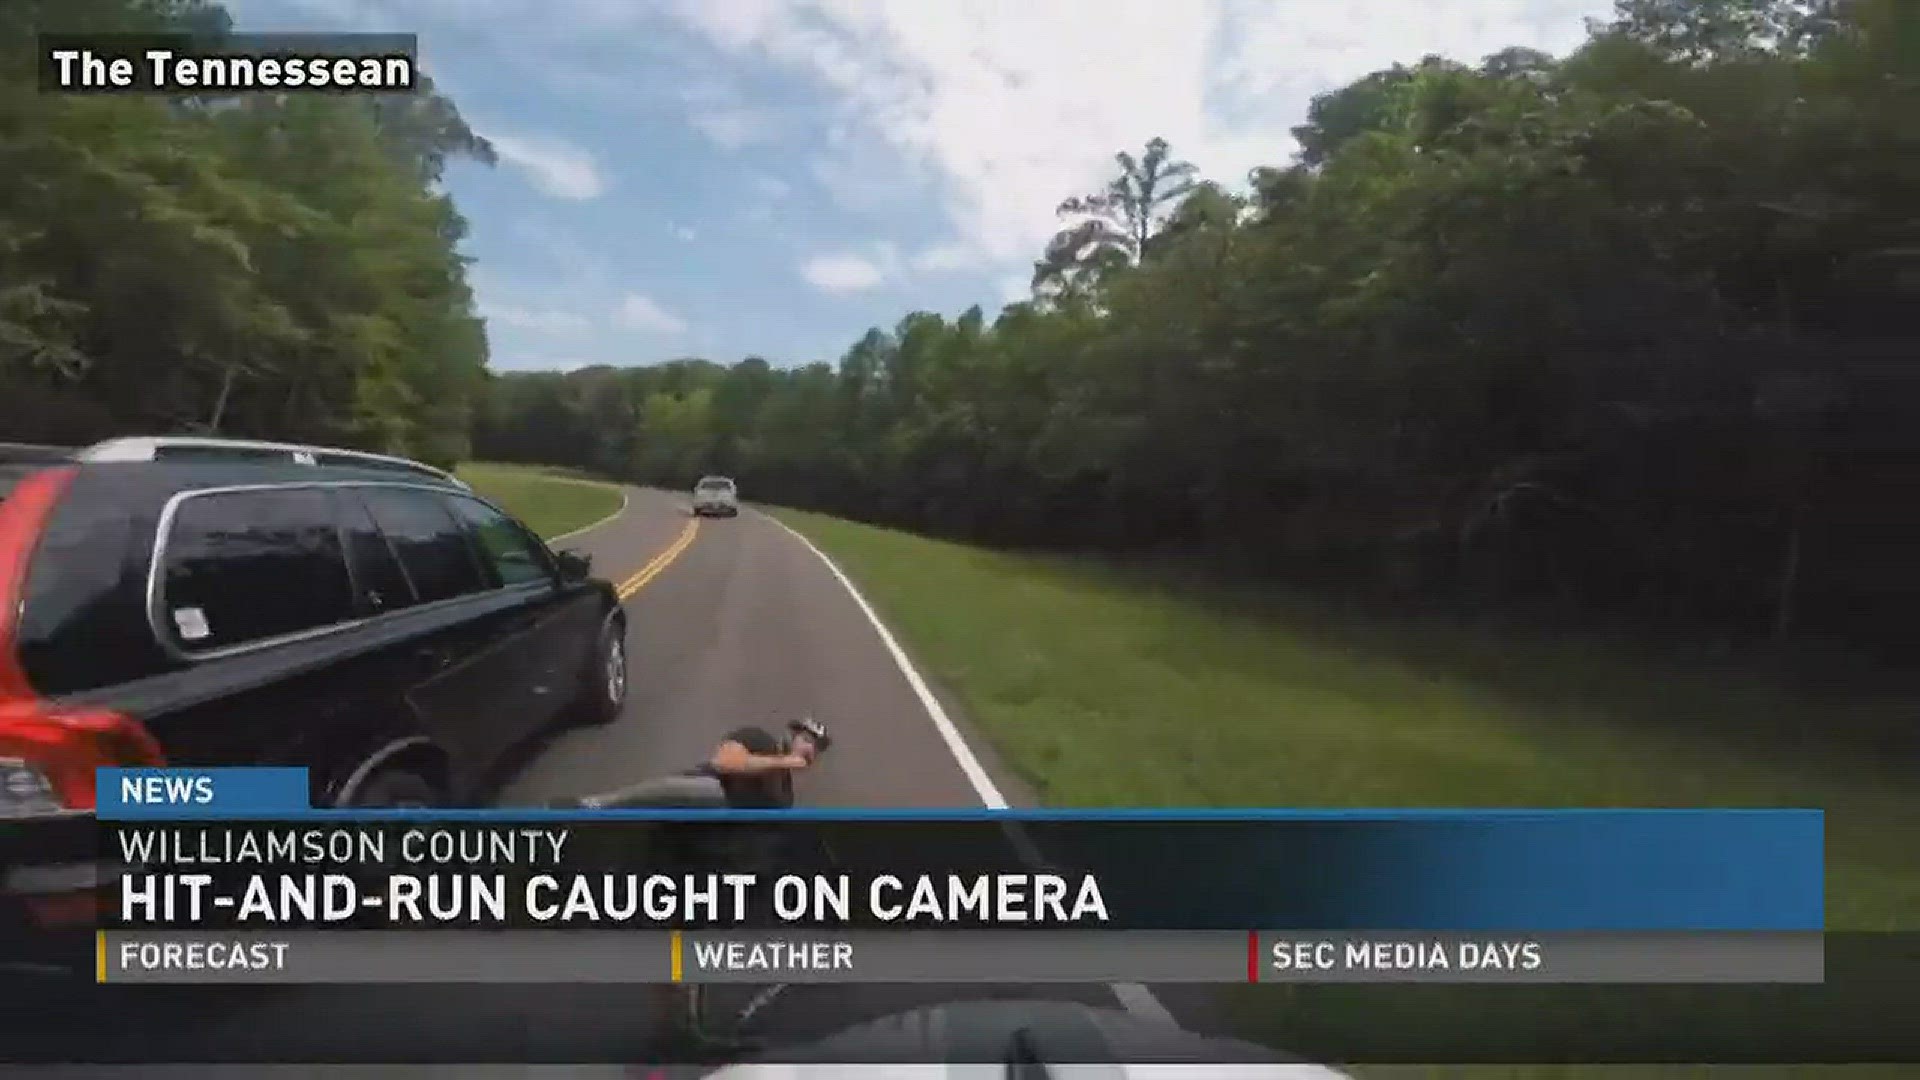 Video shows S-U-V hit-and-run on cyclist in Williamson County.